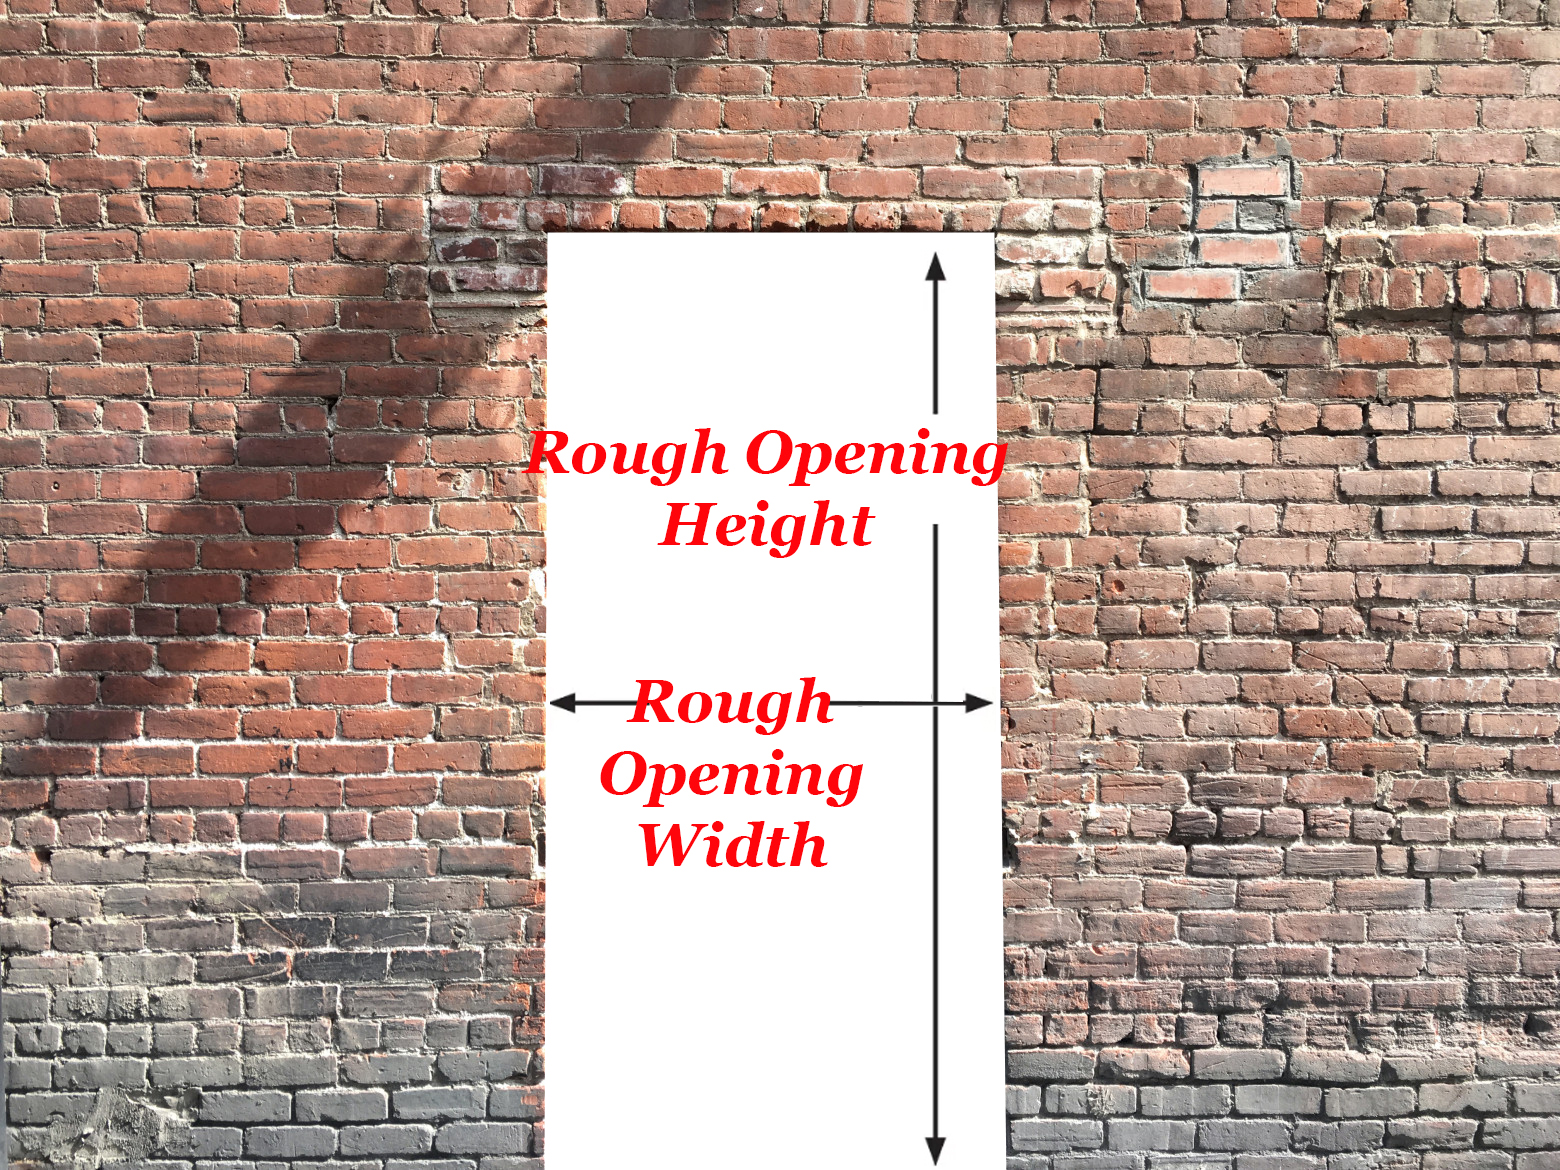 Rough Opening Sizes for Commercial Door Frames